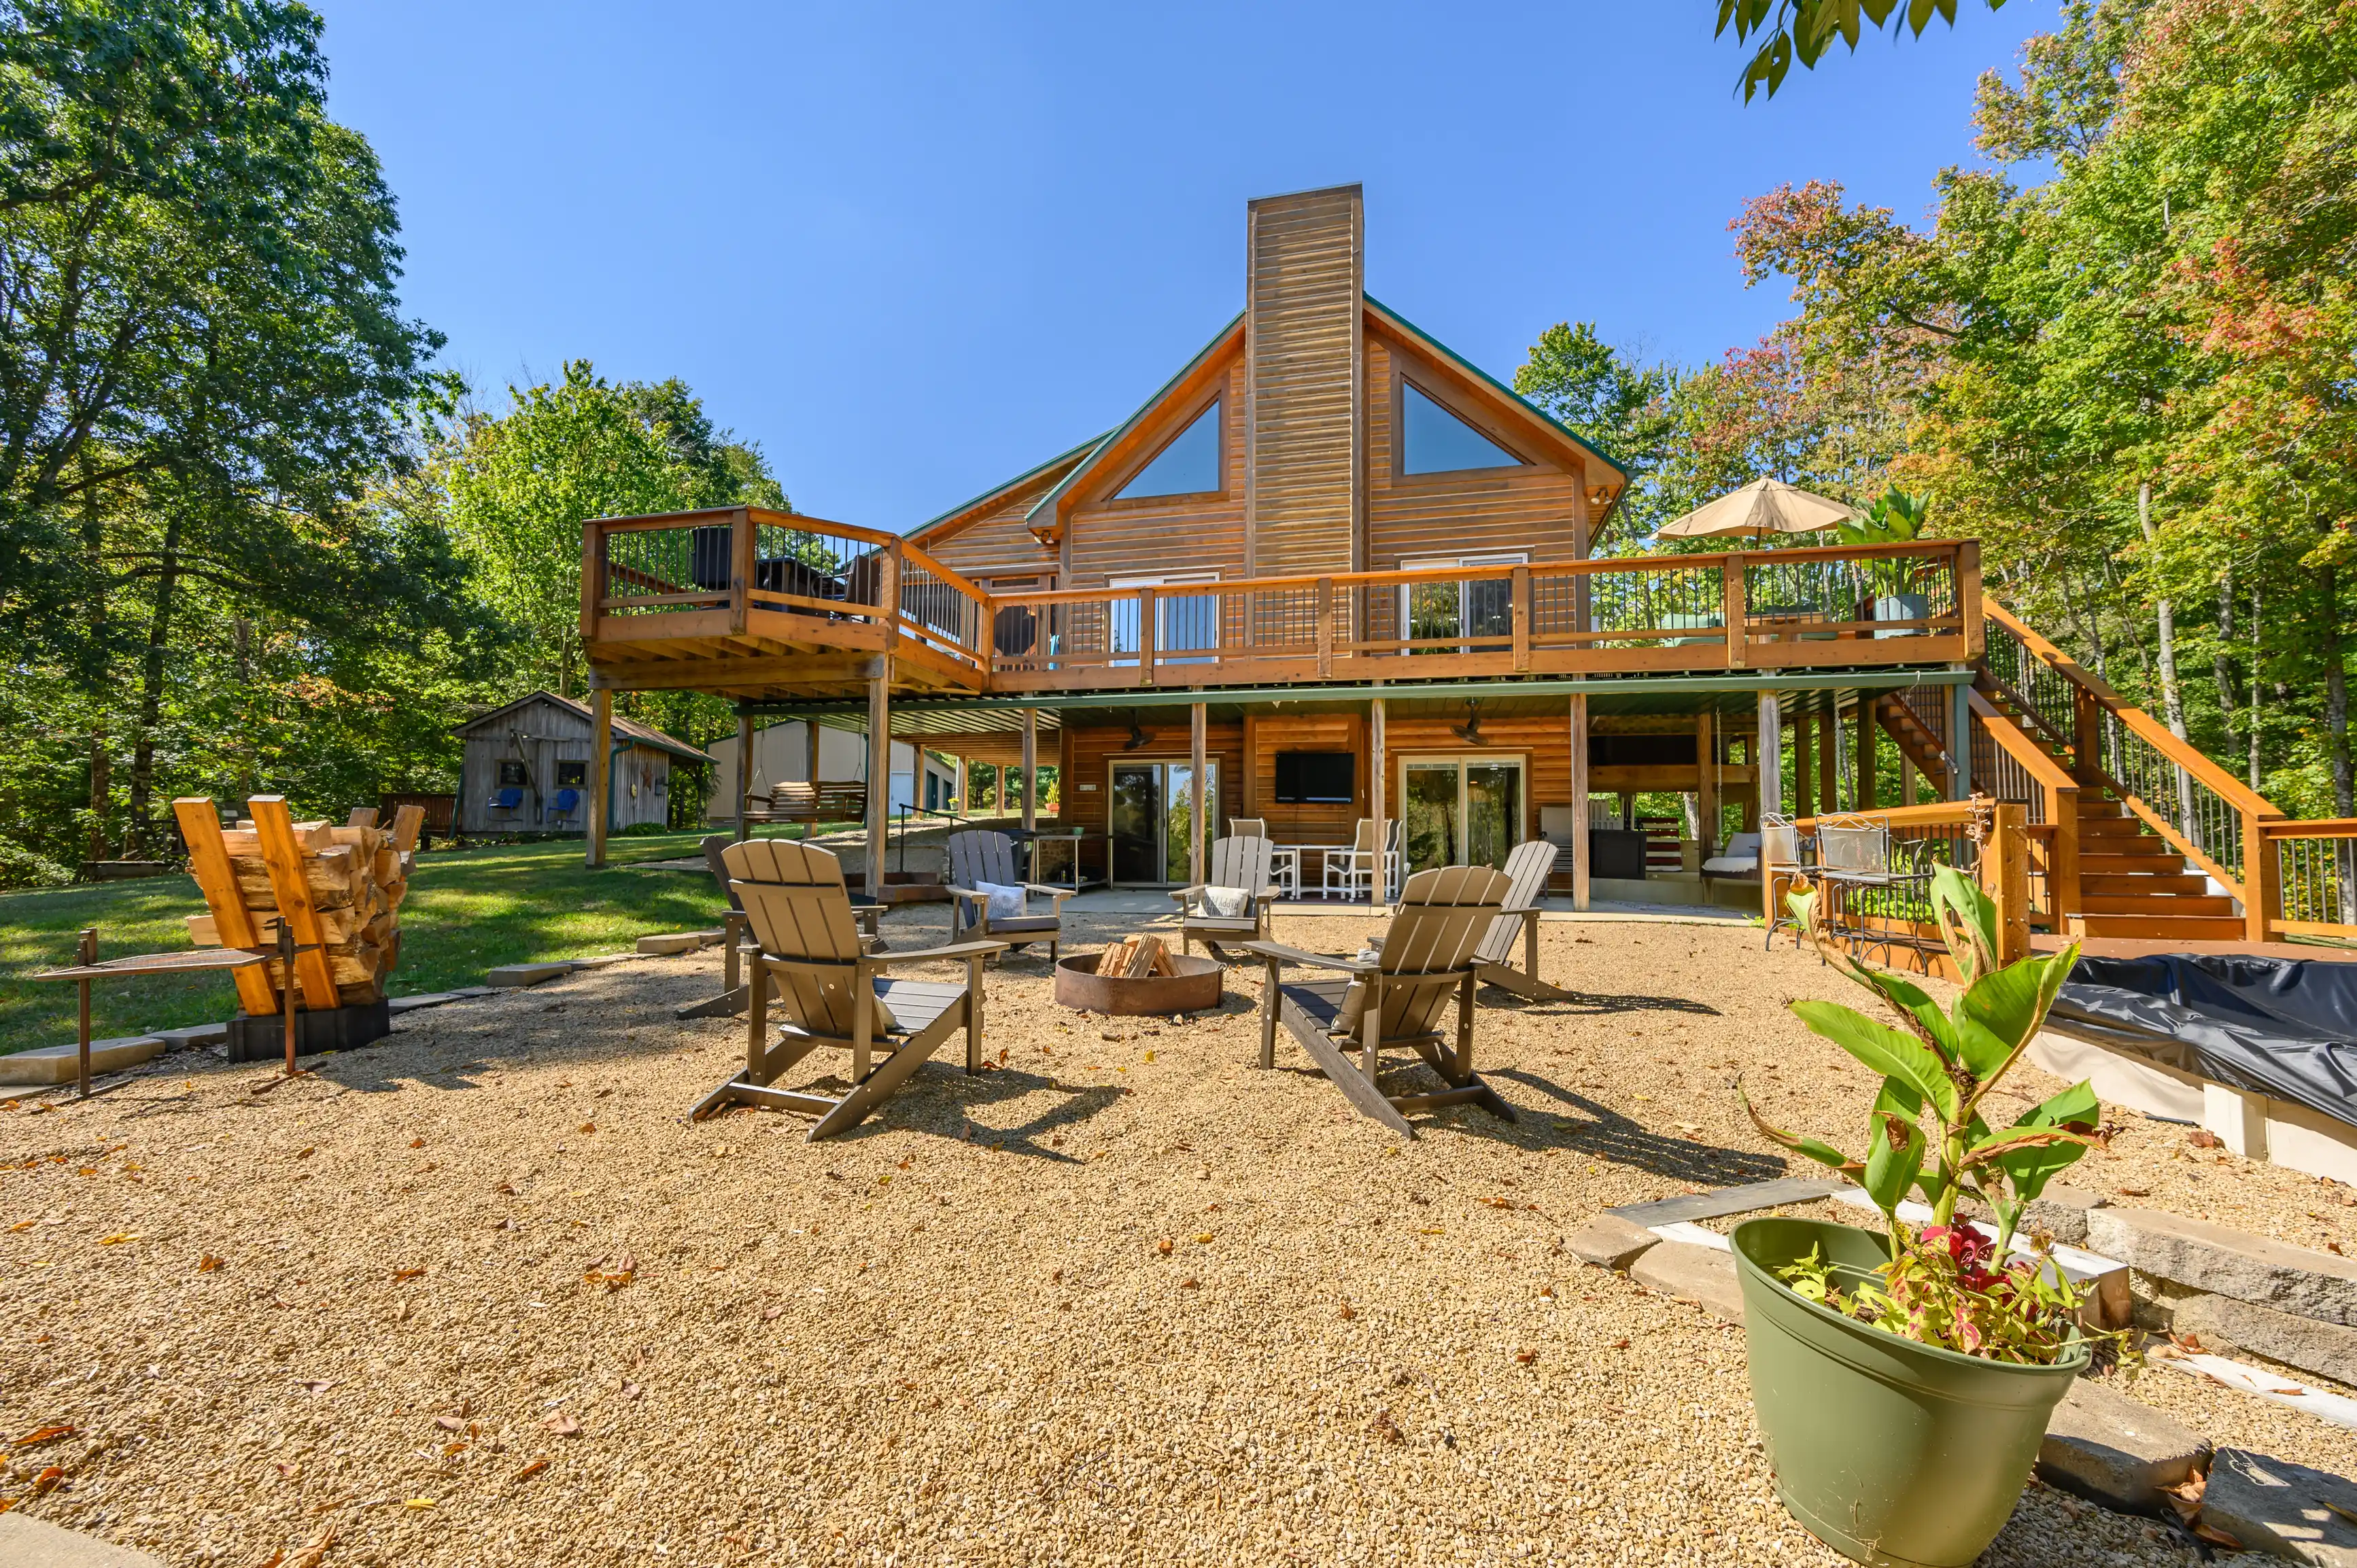 A sunny view of a large wooden cabin with a spacious deck and outdoor seating area surrounded by trees.